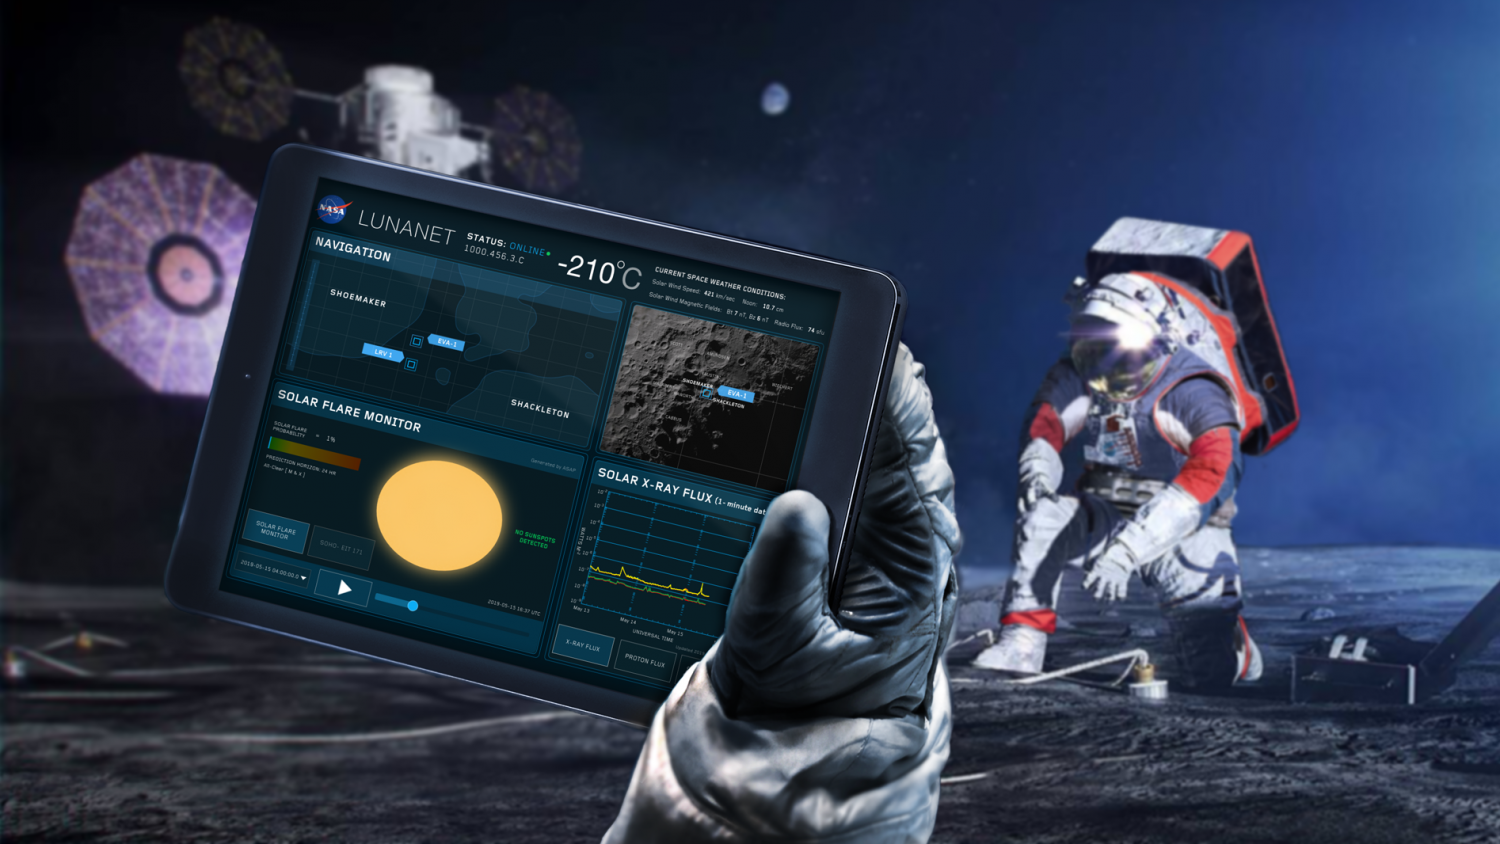 GPS on Moon: NASA Engineer is Developing an AI that Would Lead Astronauts to the Lunar Surface